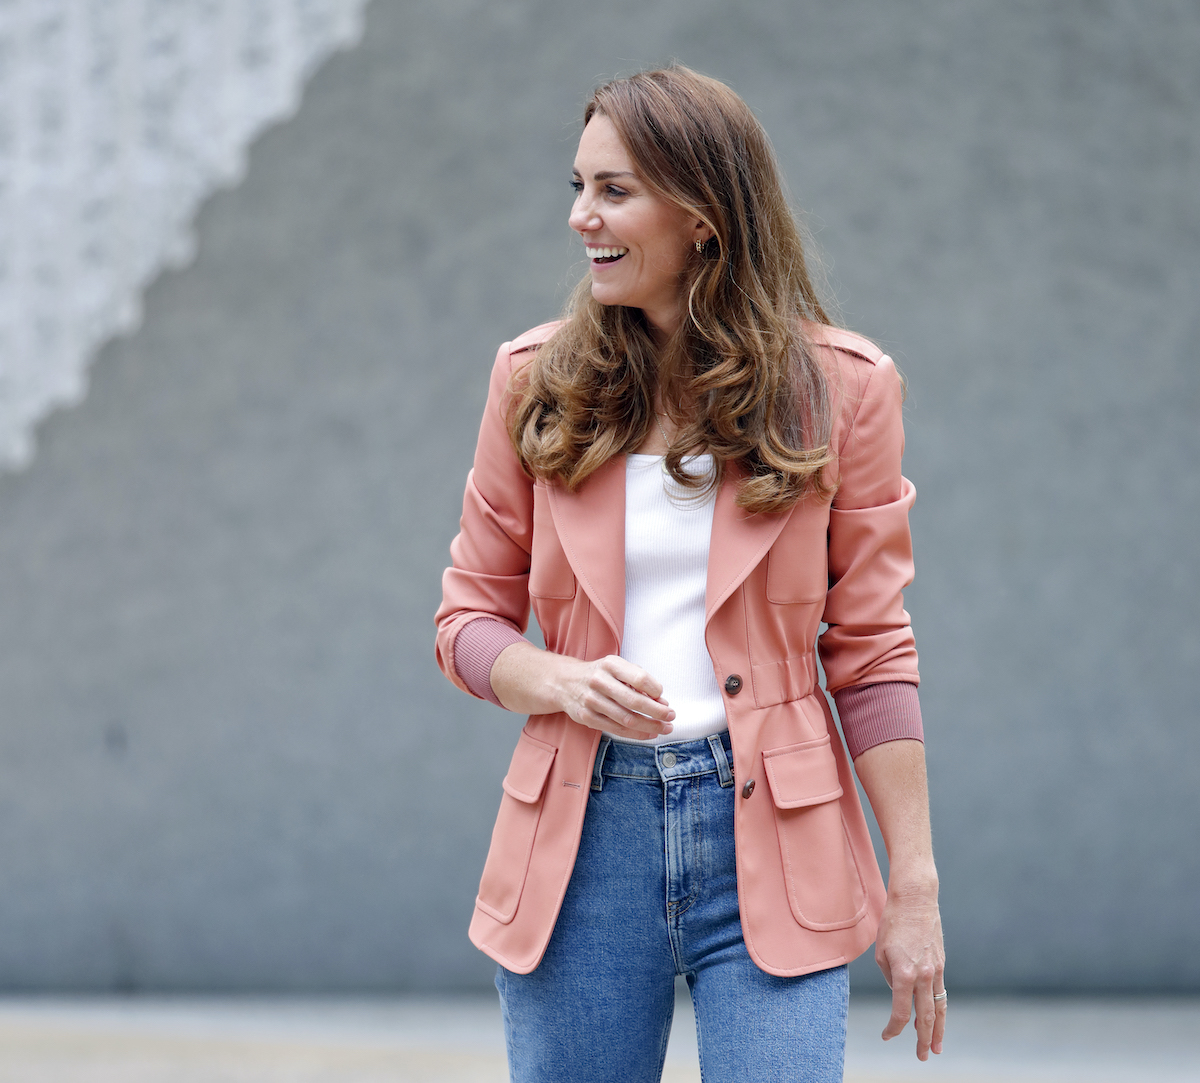 Kate Middleton laughing, facing right, wearing a pink blazer, white shirt and high waisted jeans